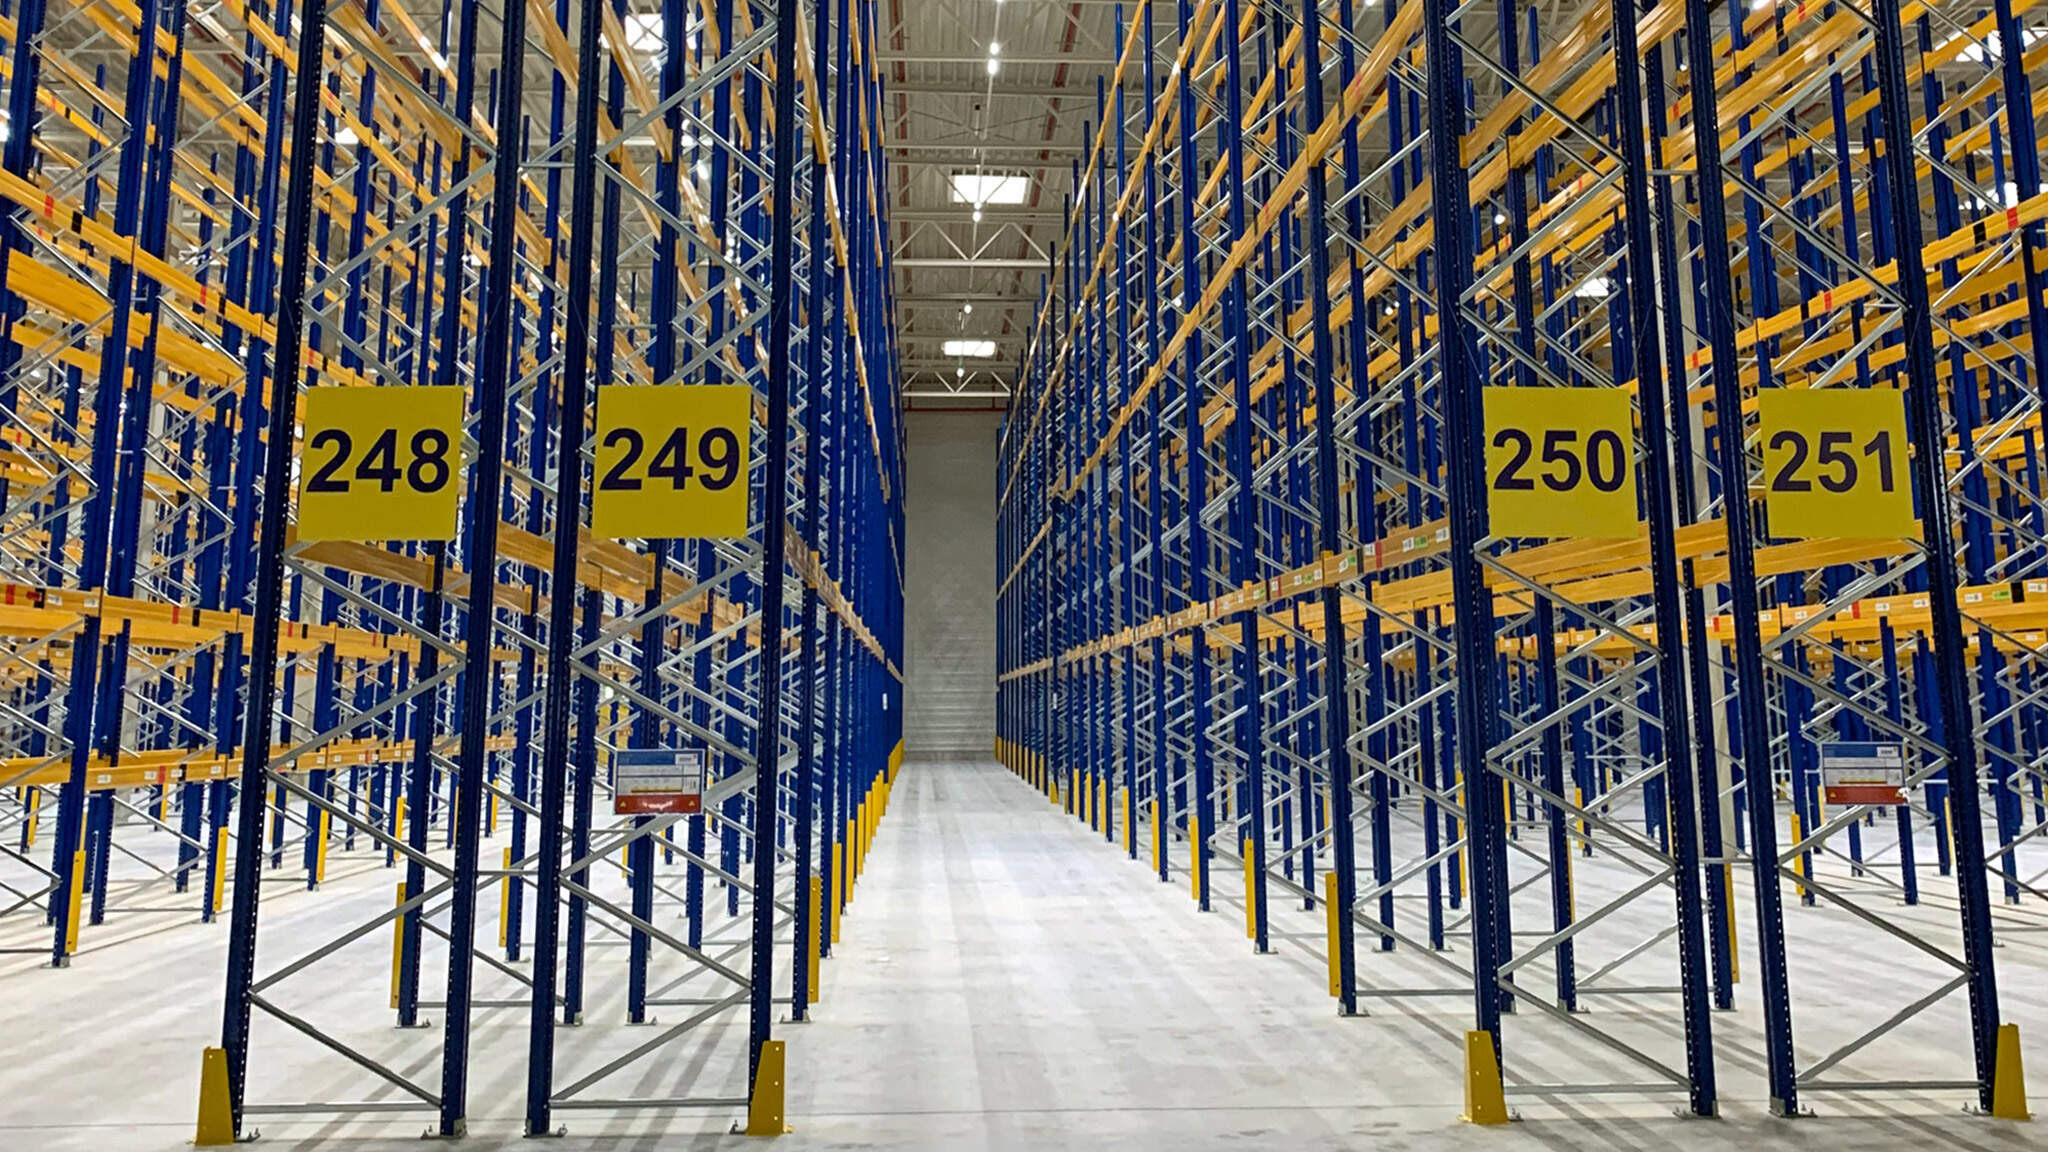 DACHSER’s new facility comprises 84,000 m2 and includes two warehouses with a total logistics area of 40,000 m2.